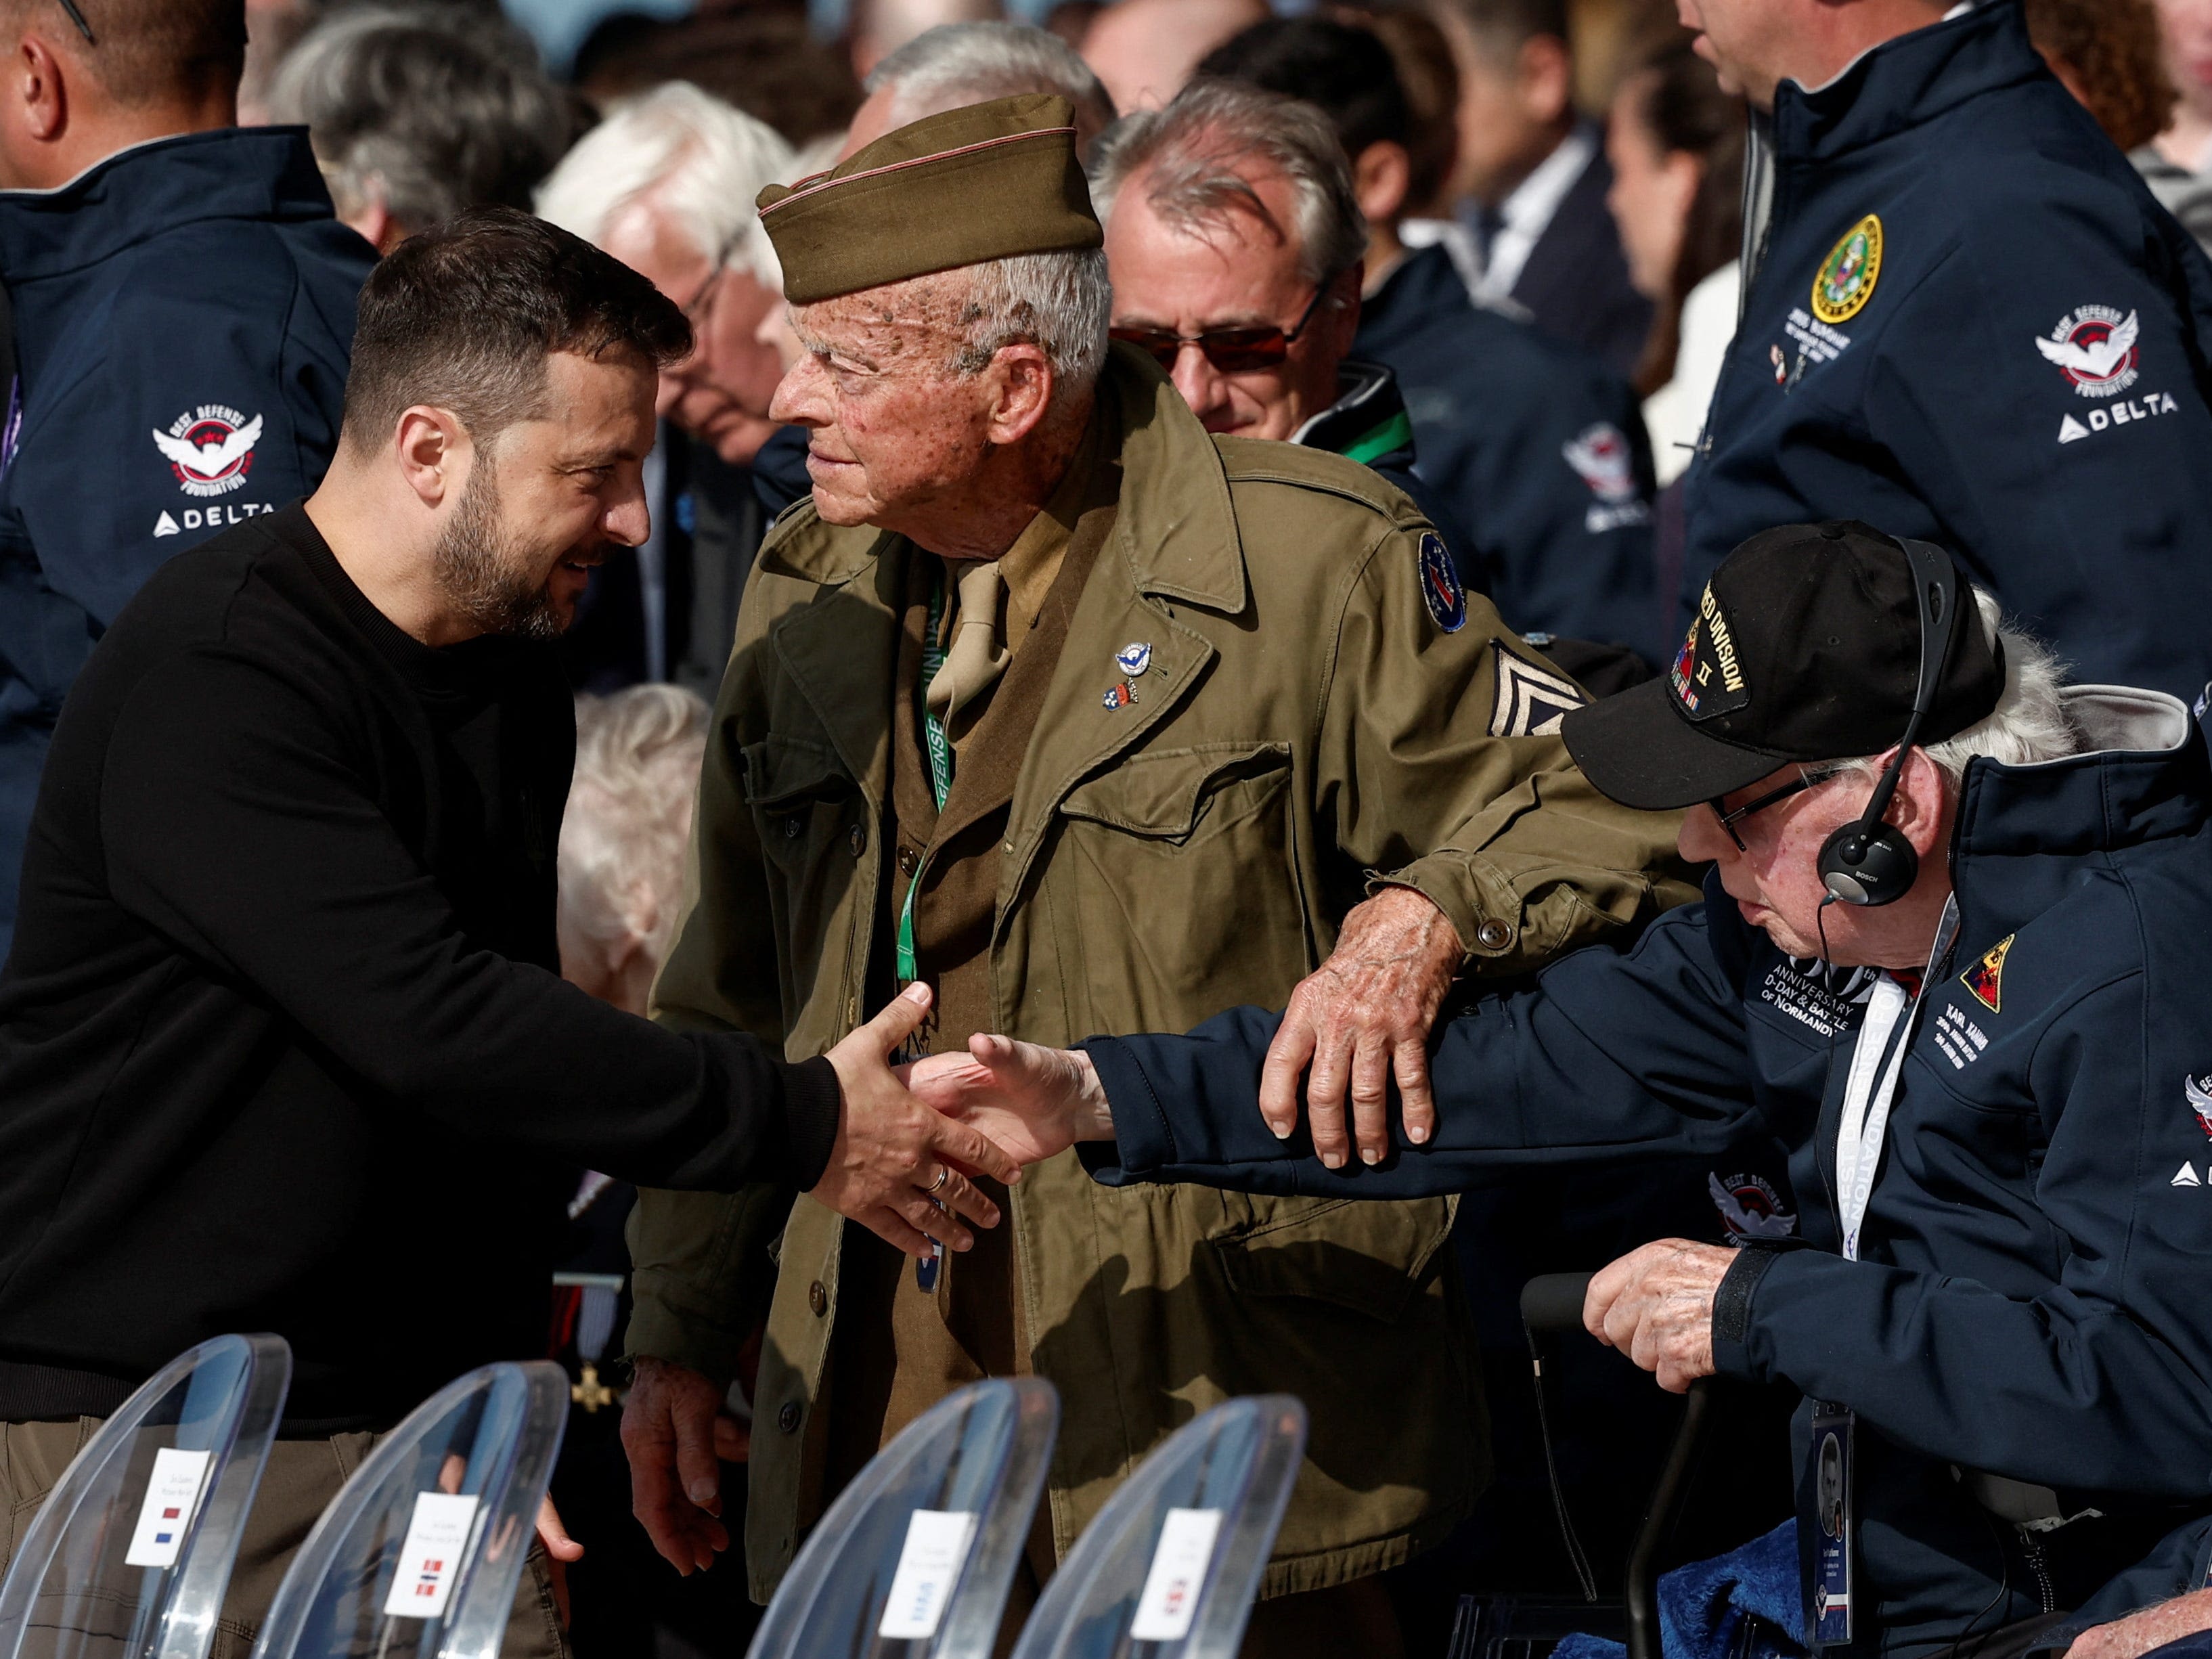 D-Day invasion veteran calls Ukraine's Zelenskyy a 'savior of the people' at an 80th anniversary event in Normandy